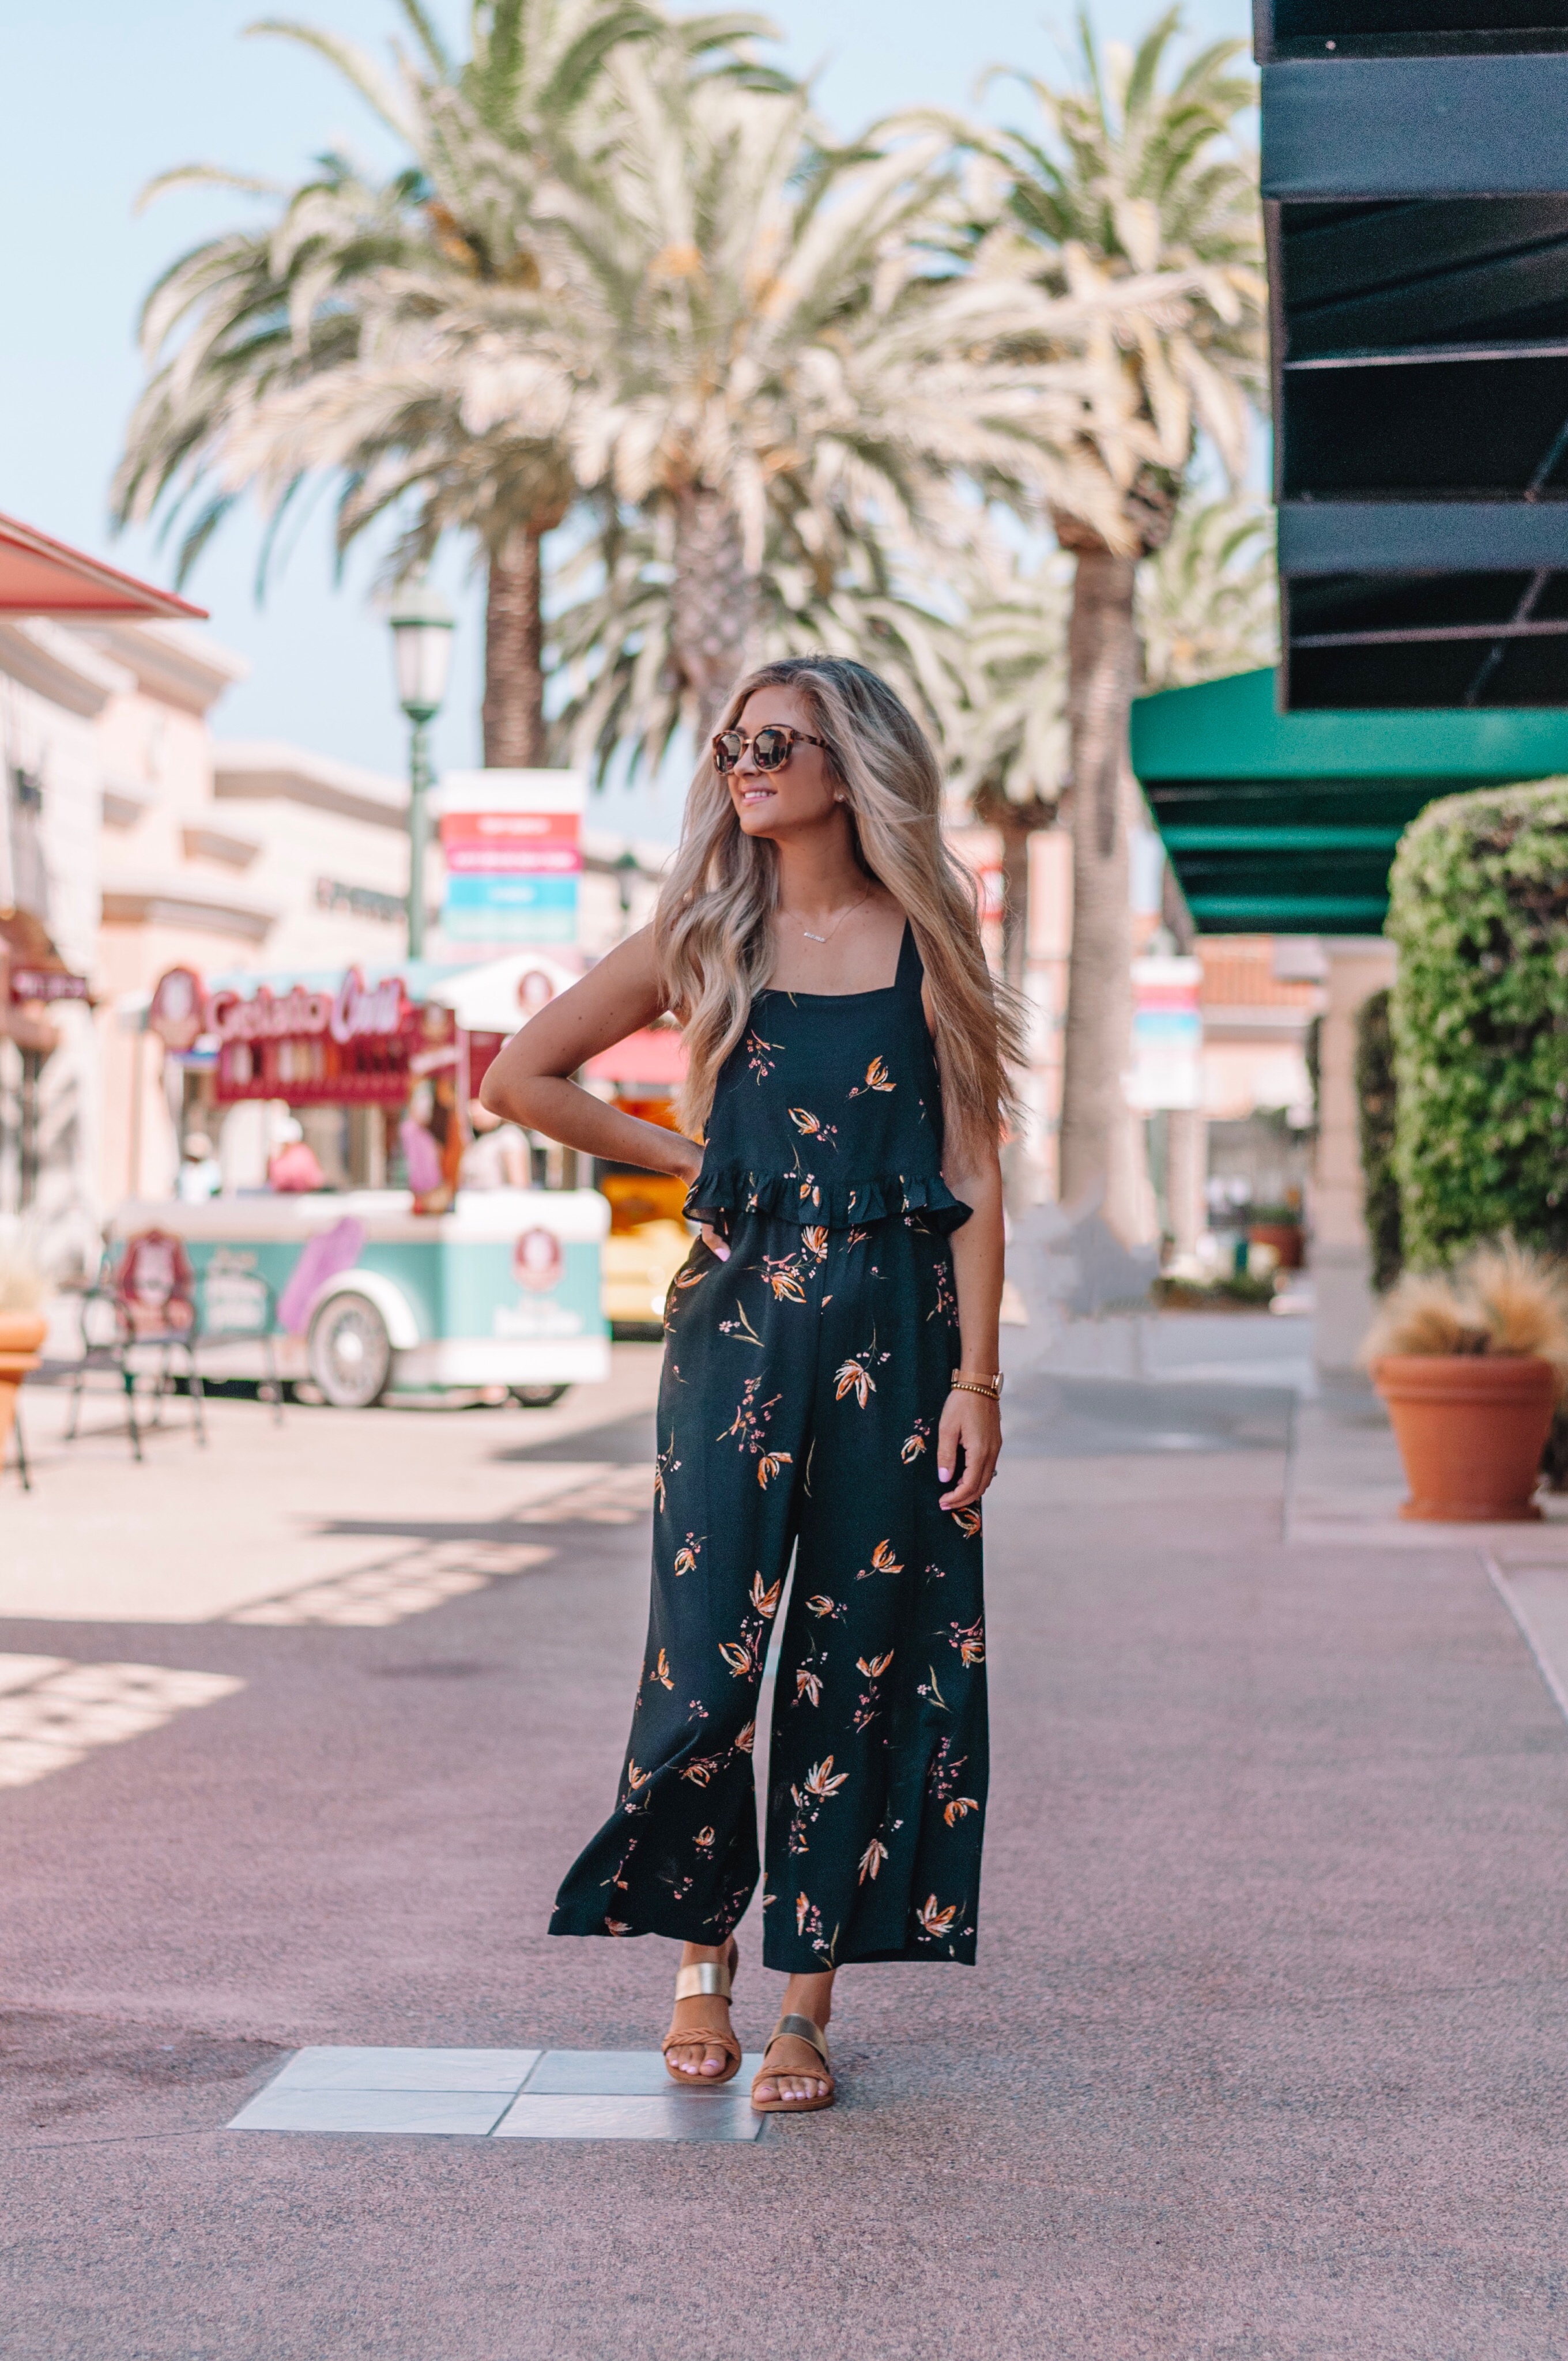 Getting Ready For Fall At The Carlsbad Premium Outlets - Kristy By The Sea